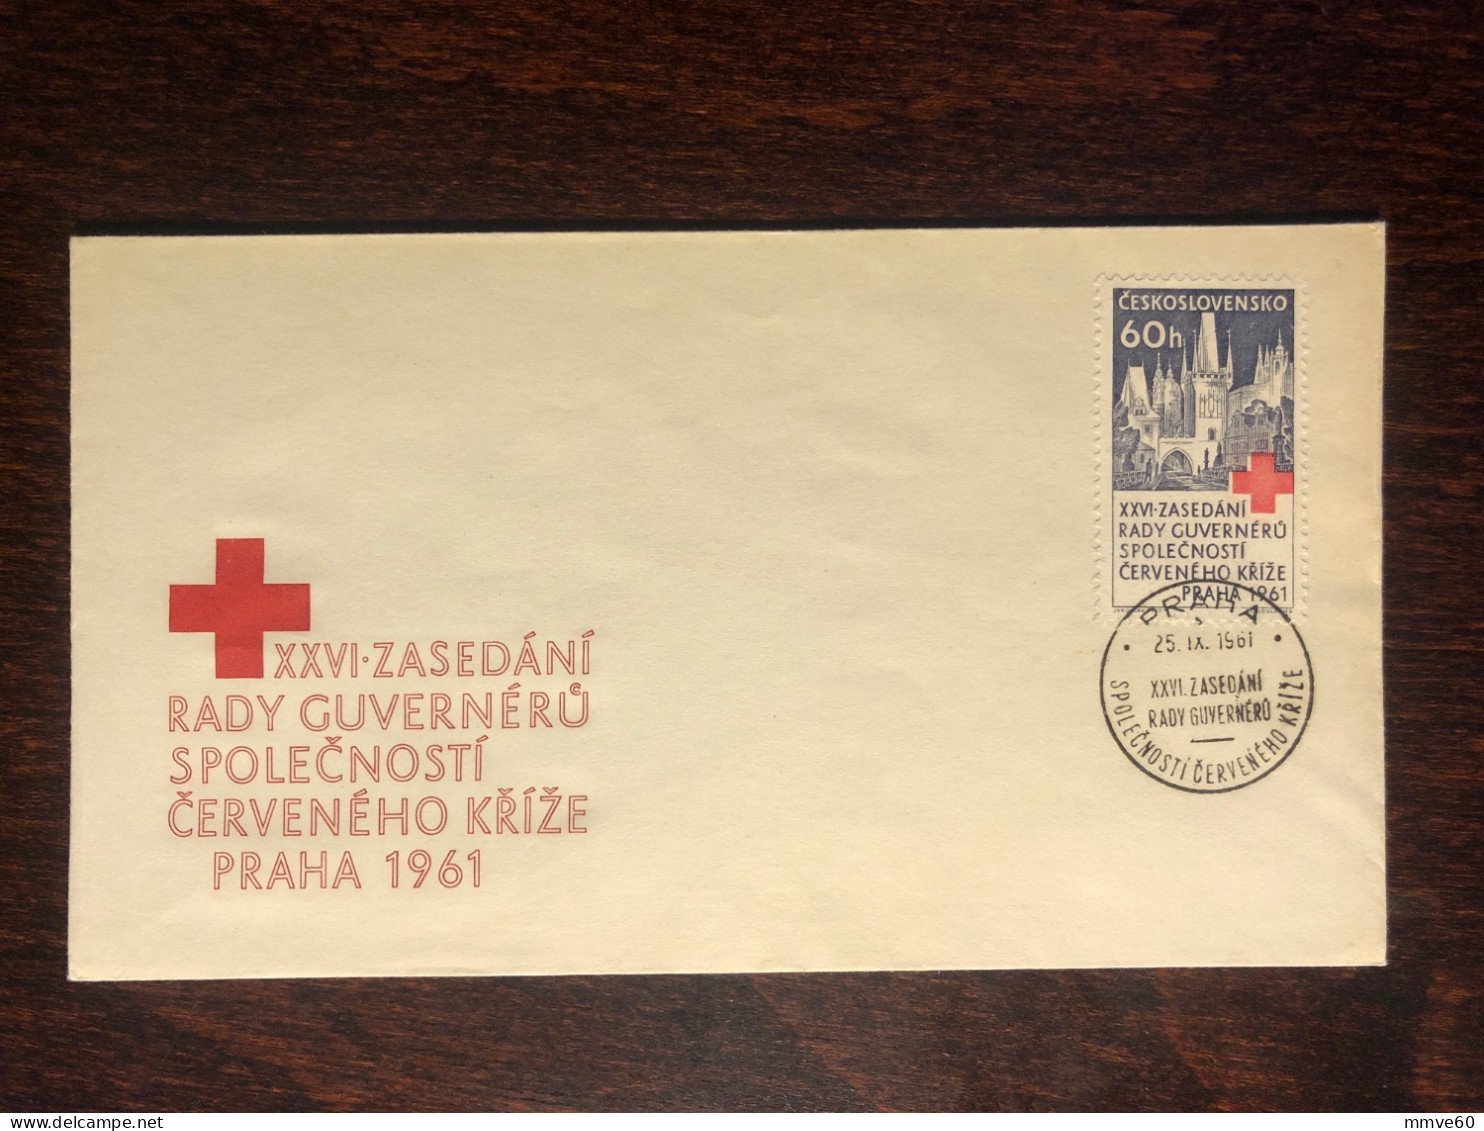 CZECHOSLOVAKIA FDC COVER 1961 YEAR RED CROSS HEALTH MEDICINE STAMPS - FDC